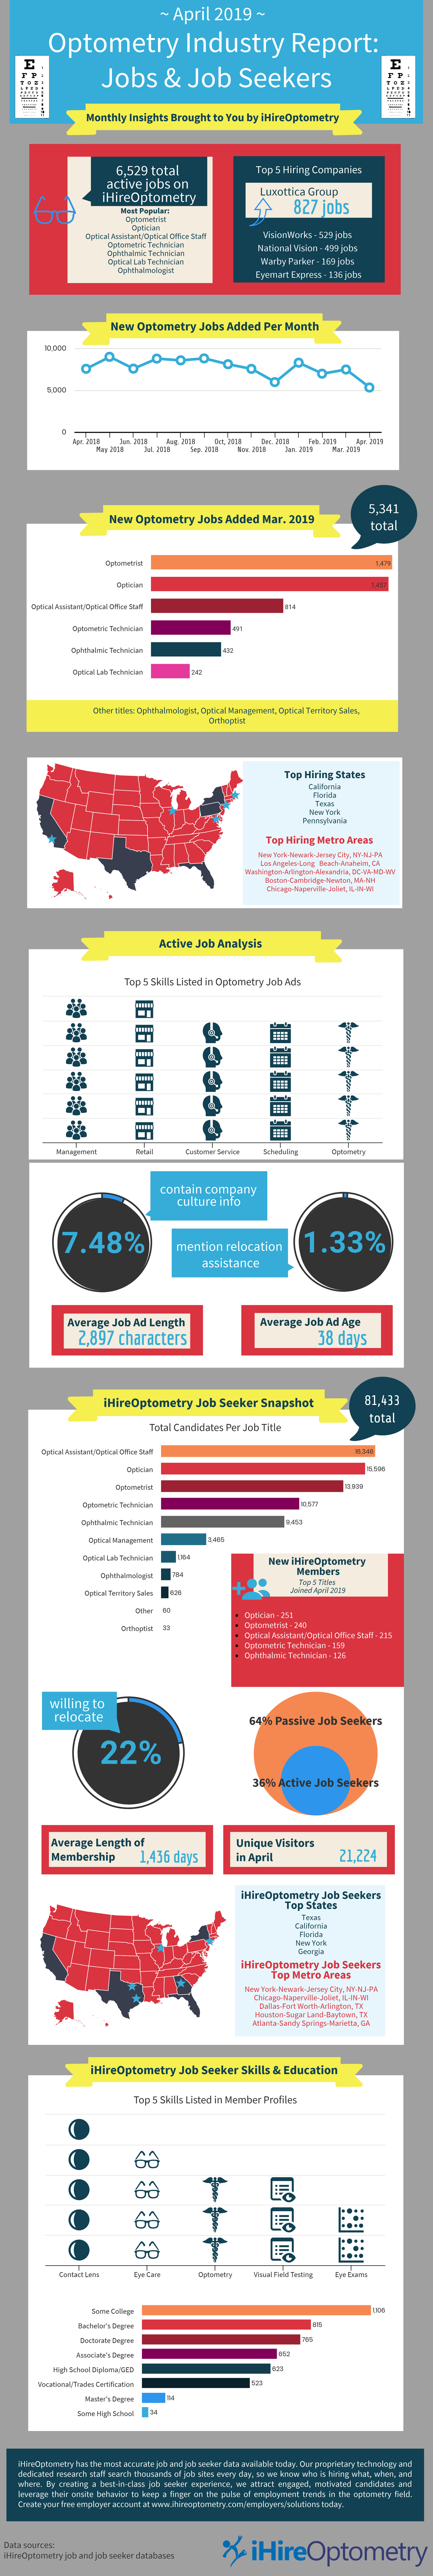 iHireOptometry’s eye care industry overview for April 2019. Infographic.